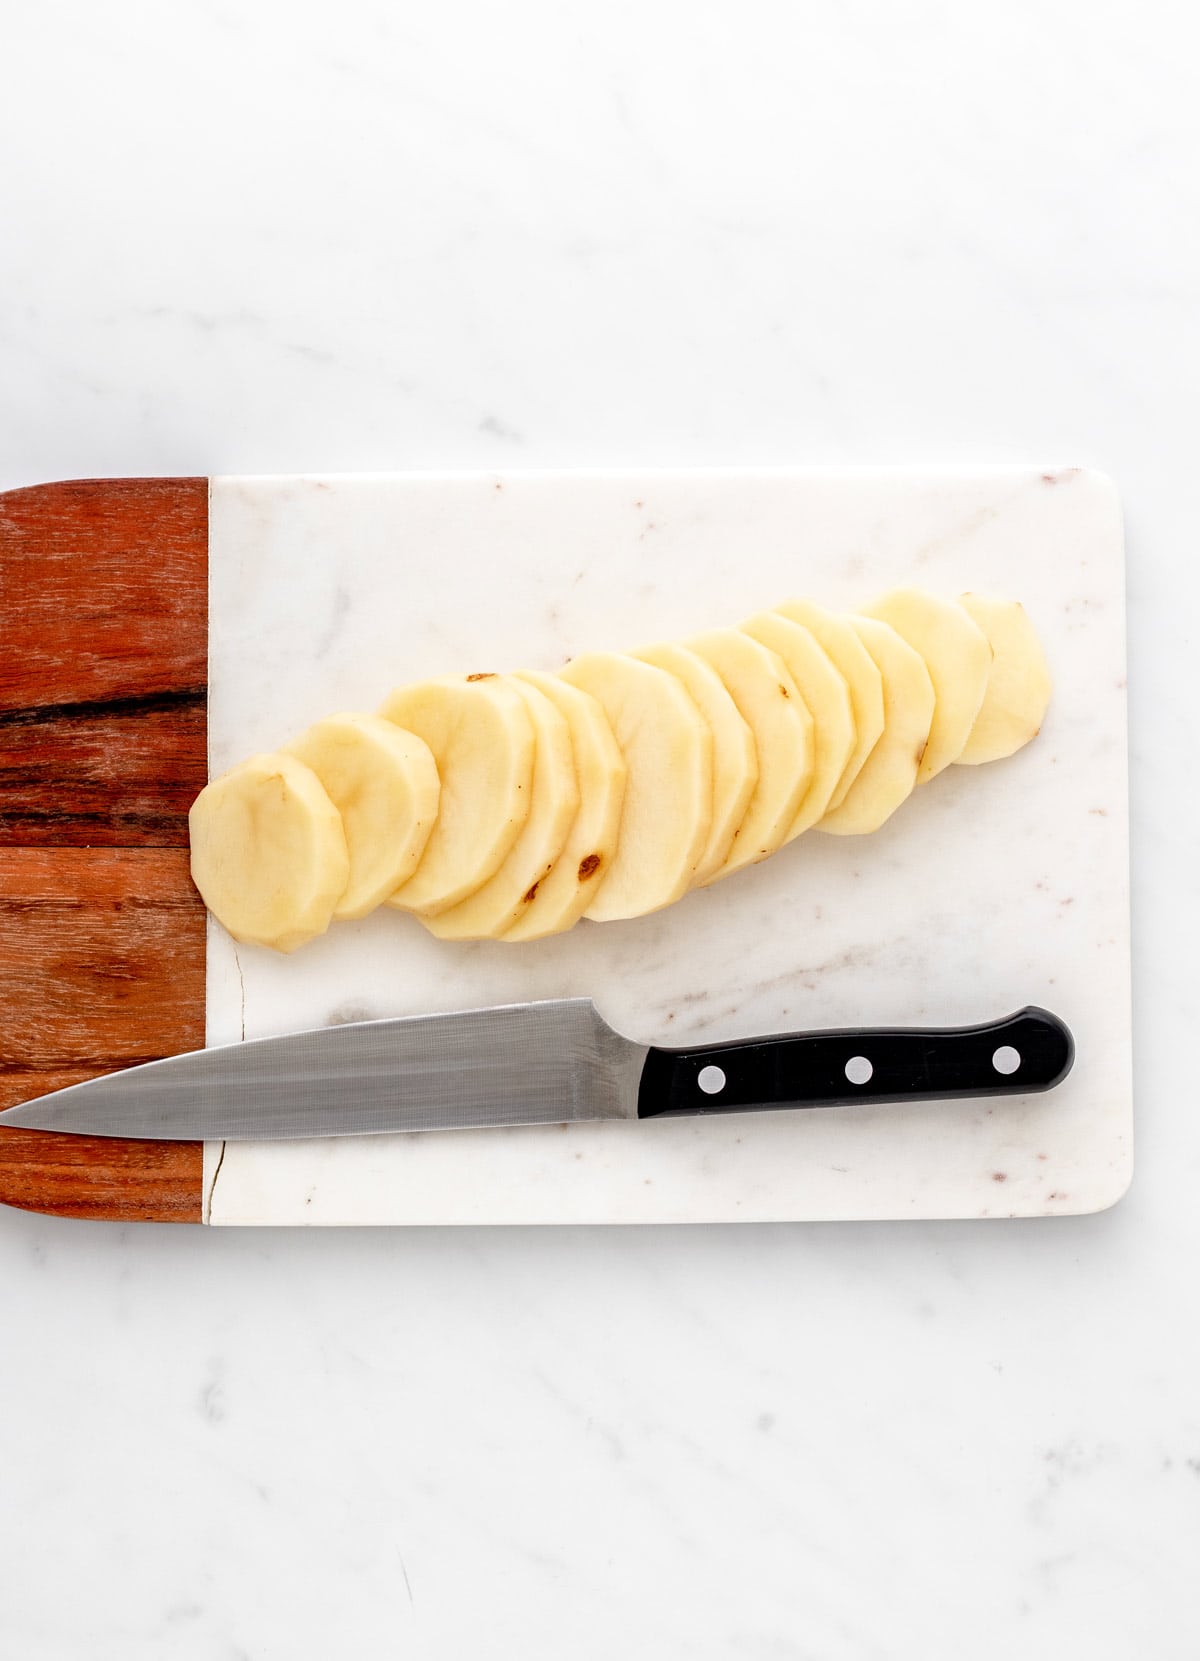 Russet potatoes cut into 1/4 inch slices on a wooden cutting board next to a knife.